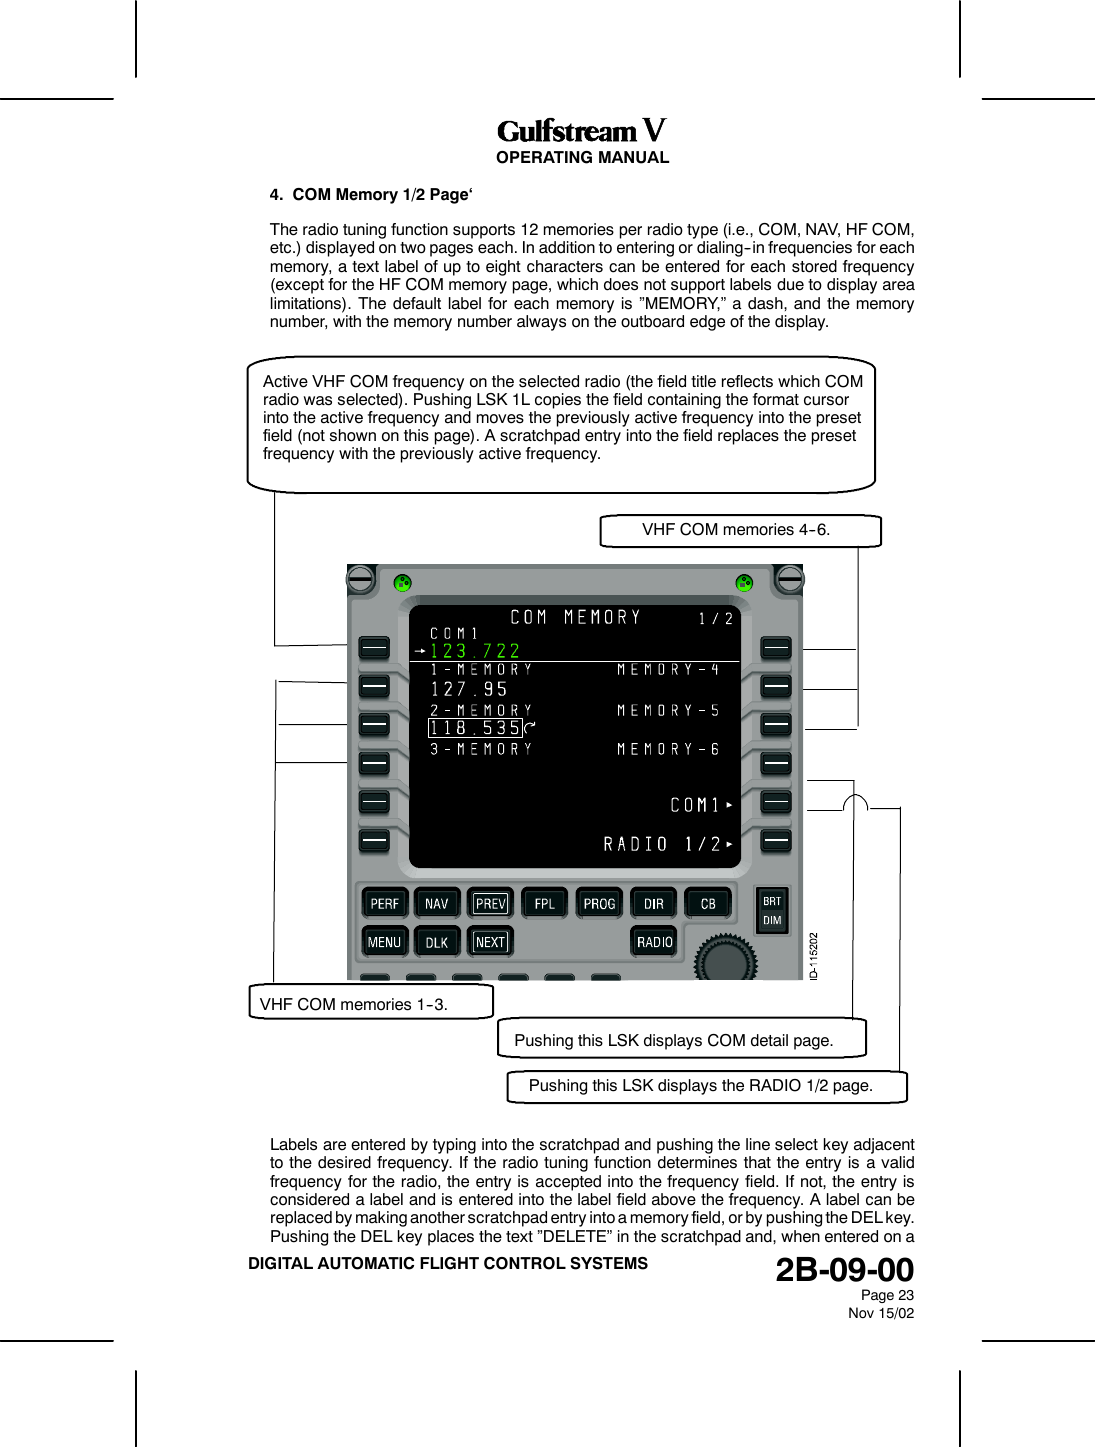 OPERATING MANUAL2B-09-00Page 23Nov 15/02DIGITAL AUTOMATIC FLIGHT CONTROL SYSTEMS4. COM Memory 1/2 Page‘The radio tuning function supports 12 memories per radio type (i.e., COM, NAV, HF COM,etc.) displayed on two pages each. In addition to entering or dialing--in frequencies for eachmemory, a text label of up to eight characters can be entered for each stored frequency(except for the HF COM memory page, which does not support labels due to display arealimitations). The default label for each memory is ”MEMORY,” a dash, and the memorynumber, with the memory number always on the outboard edge of the display.Active VHF COM frequency on the selected radio (the field title reflects which COMradio was selected). Pushing LSK 1L copies the field containing the format cursorinto the active frequency and moves the previously active frequency into the presetfield (not shown on this page). A scratchpad entry into the field replaces the presetfrequency with the previously active frequency.VHF COM memories 4--6.VHF COM memories 1--3.Pushing this LSK displays COM detail page.Pushing this LSK displays the RADIO 1/2 page.Labels are entered by typing into the scratchpad and pushing the line select key adjacentto the desired frequency. If the radio tuning function determines that the entry is a validfrequency for the radio, the entry is accepted into the frequency field. If not, the entry isconsidered a label and is entered into the label field above the frequency. A label can bereplaced by making another scratchpad entry into a memory field, or by pushing the DEL key.Pushing the DEL key places the text ”DELETE” in the scratchpad and, when entered on a